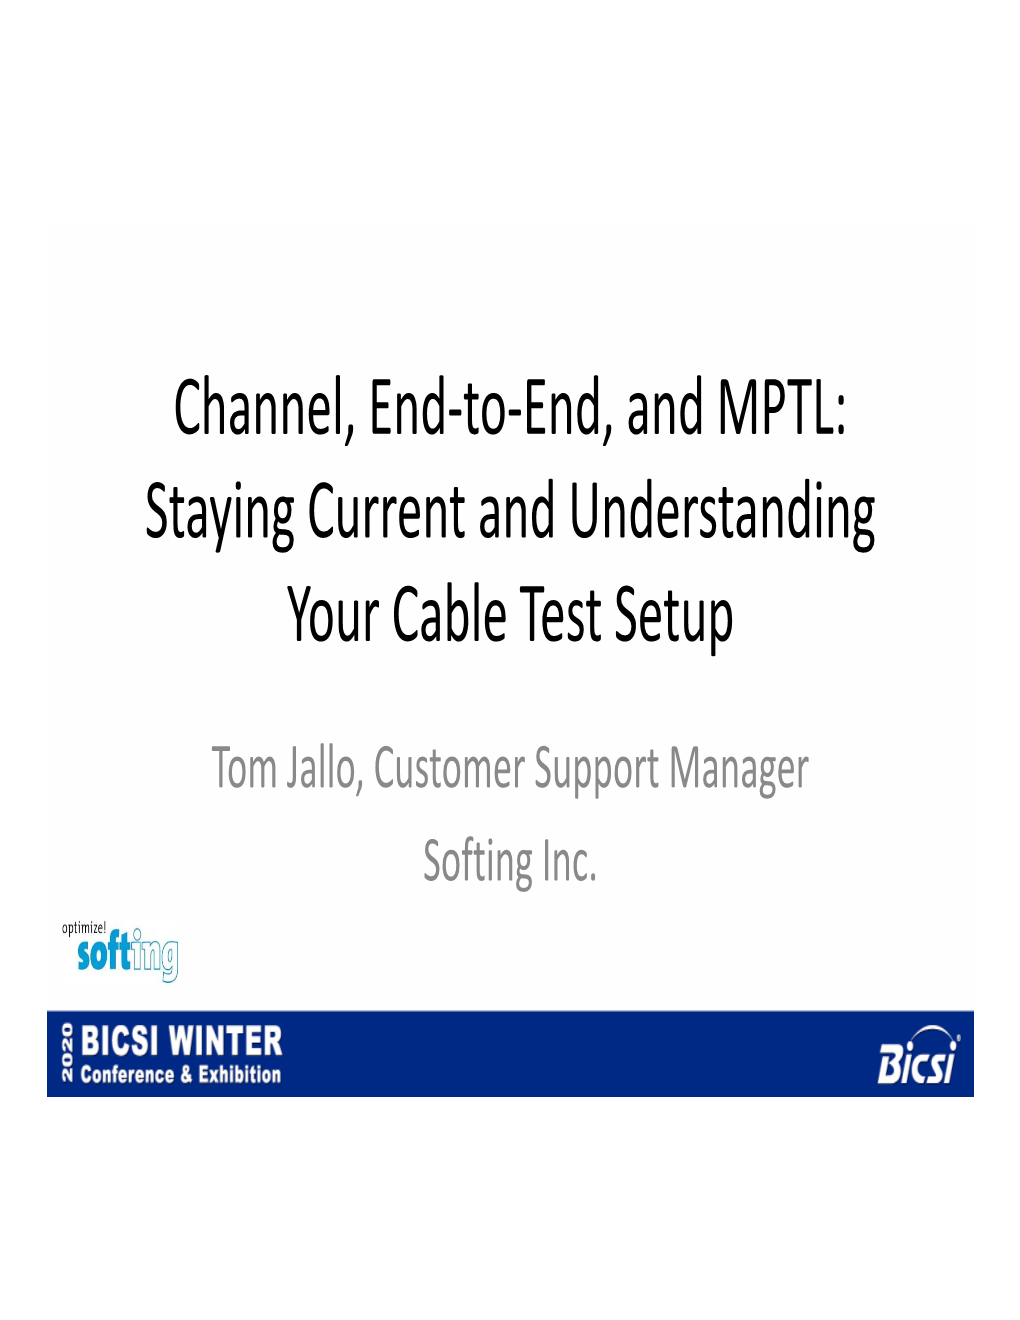 Channel, End-To-End, and MPTL: Staying Current and Understanding Your Cable Test Setup